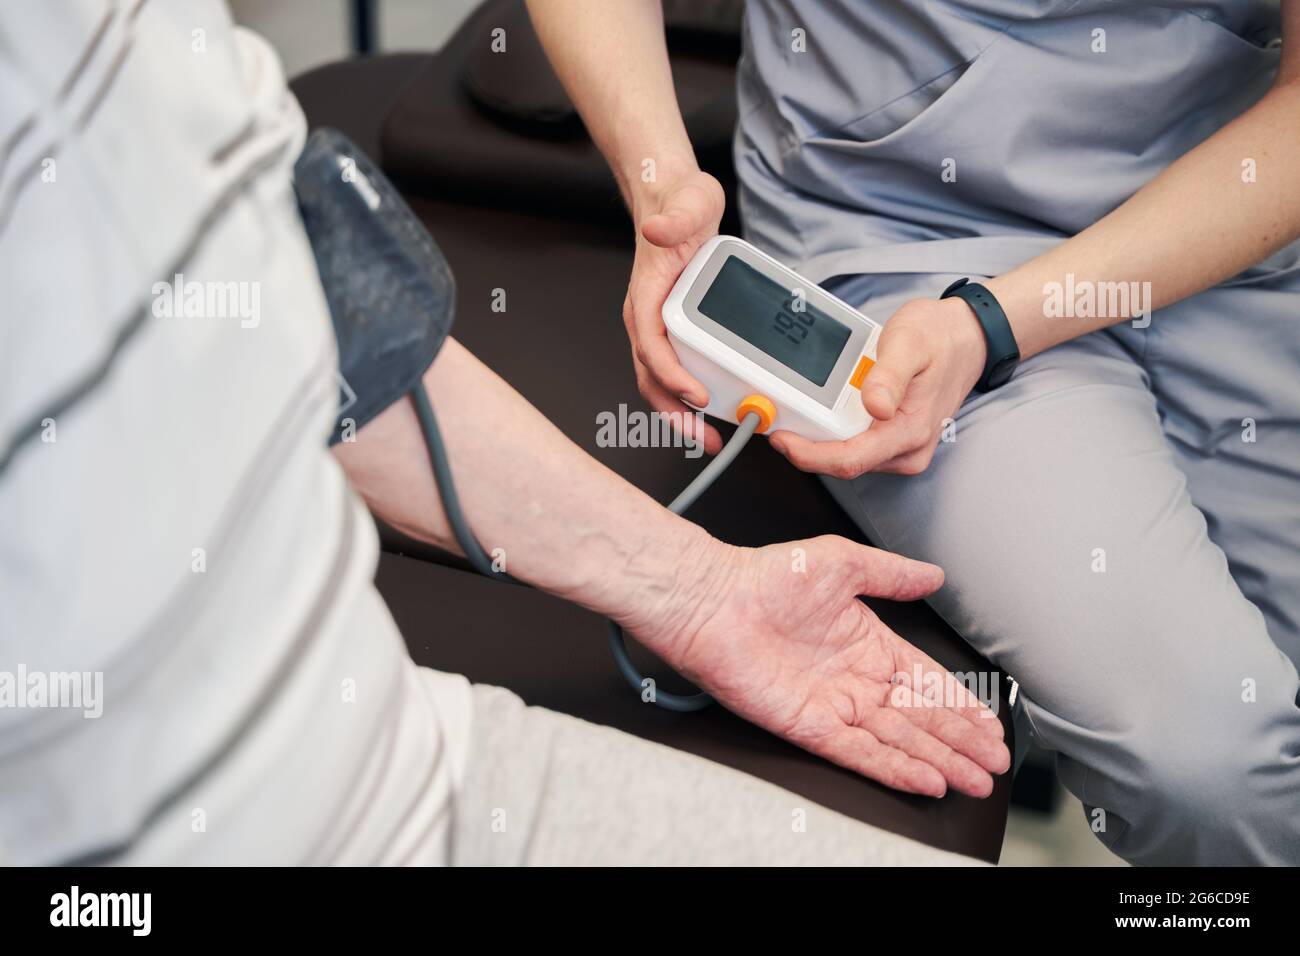 Medical worker using blood pressure monitor on pensioner Stock Photo